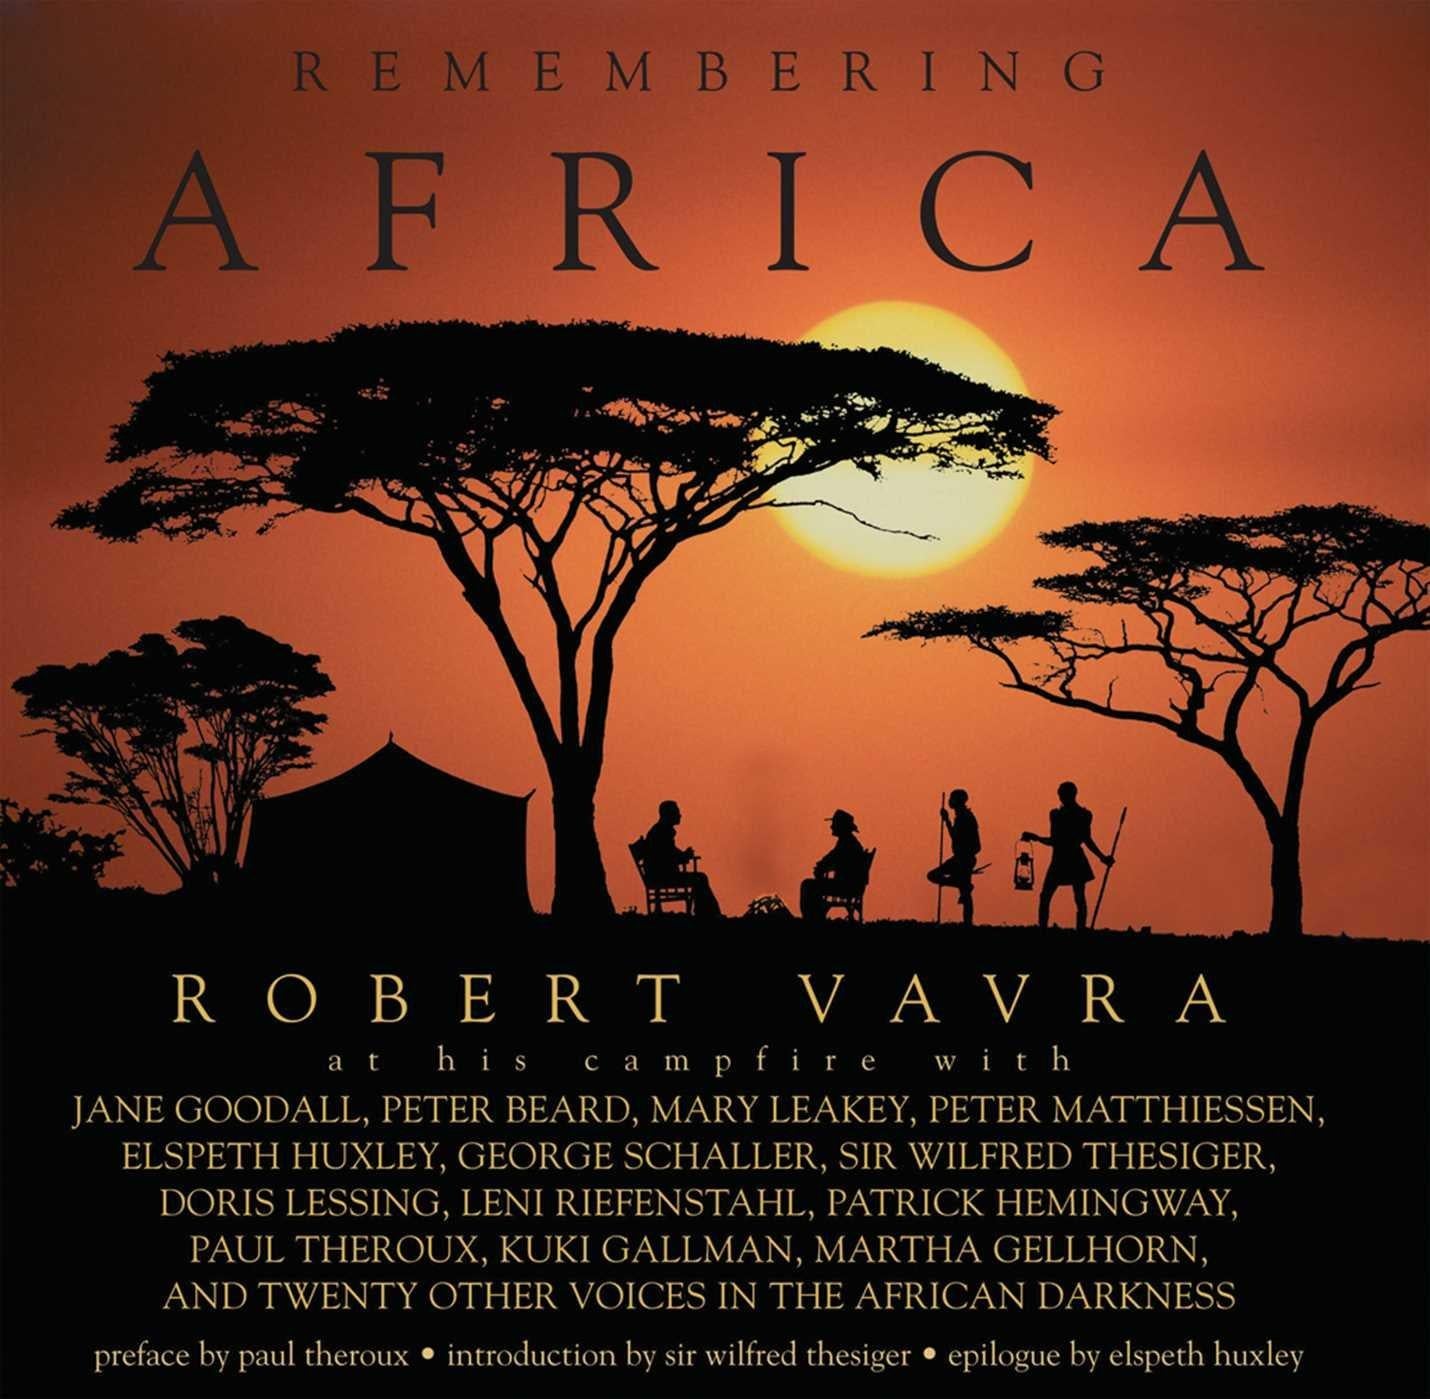 Remembering Africa by Robert Vavra hardcover book.
Large hardcover book· by photographer Robert Vavra 624 pages.
Remembering Africa is a magical conjuring of the continent of old through the eyes of 33 explorers, adventurers, rogues, raconteurs,